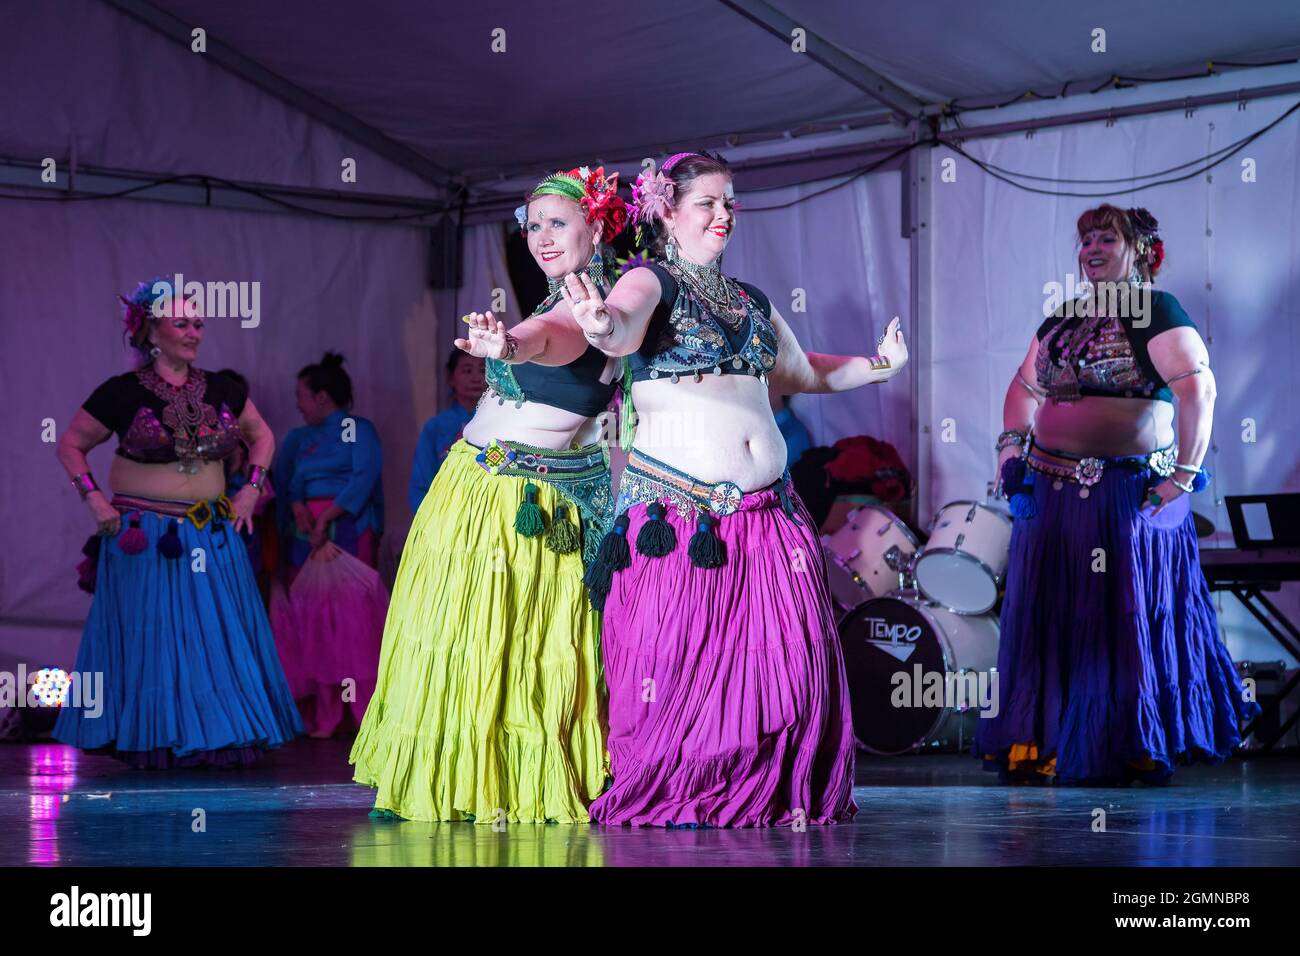 Tribal belly dancers in colorful gypsy costumes performing on stage Stock  Photo - Alamy